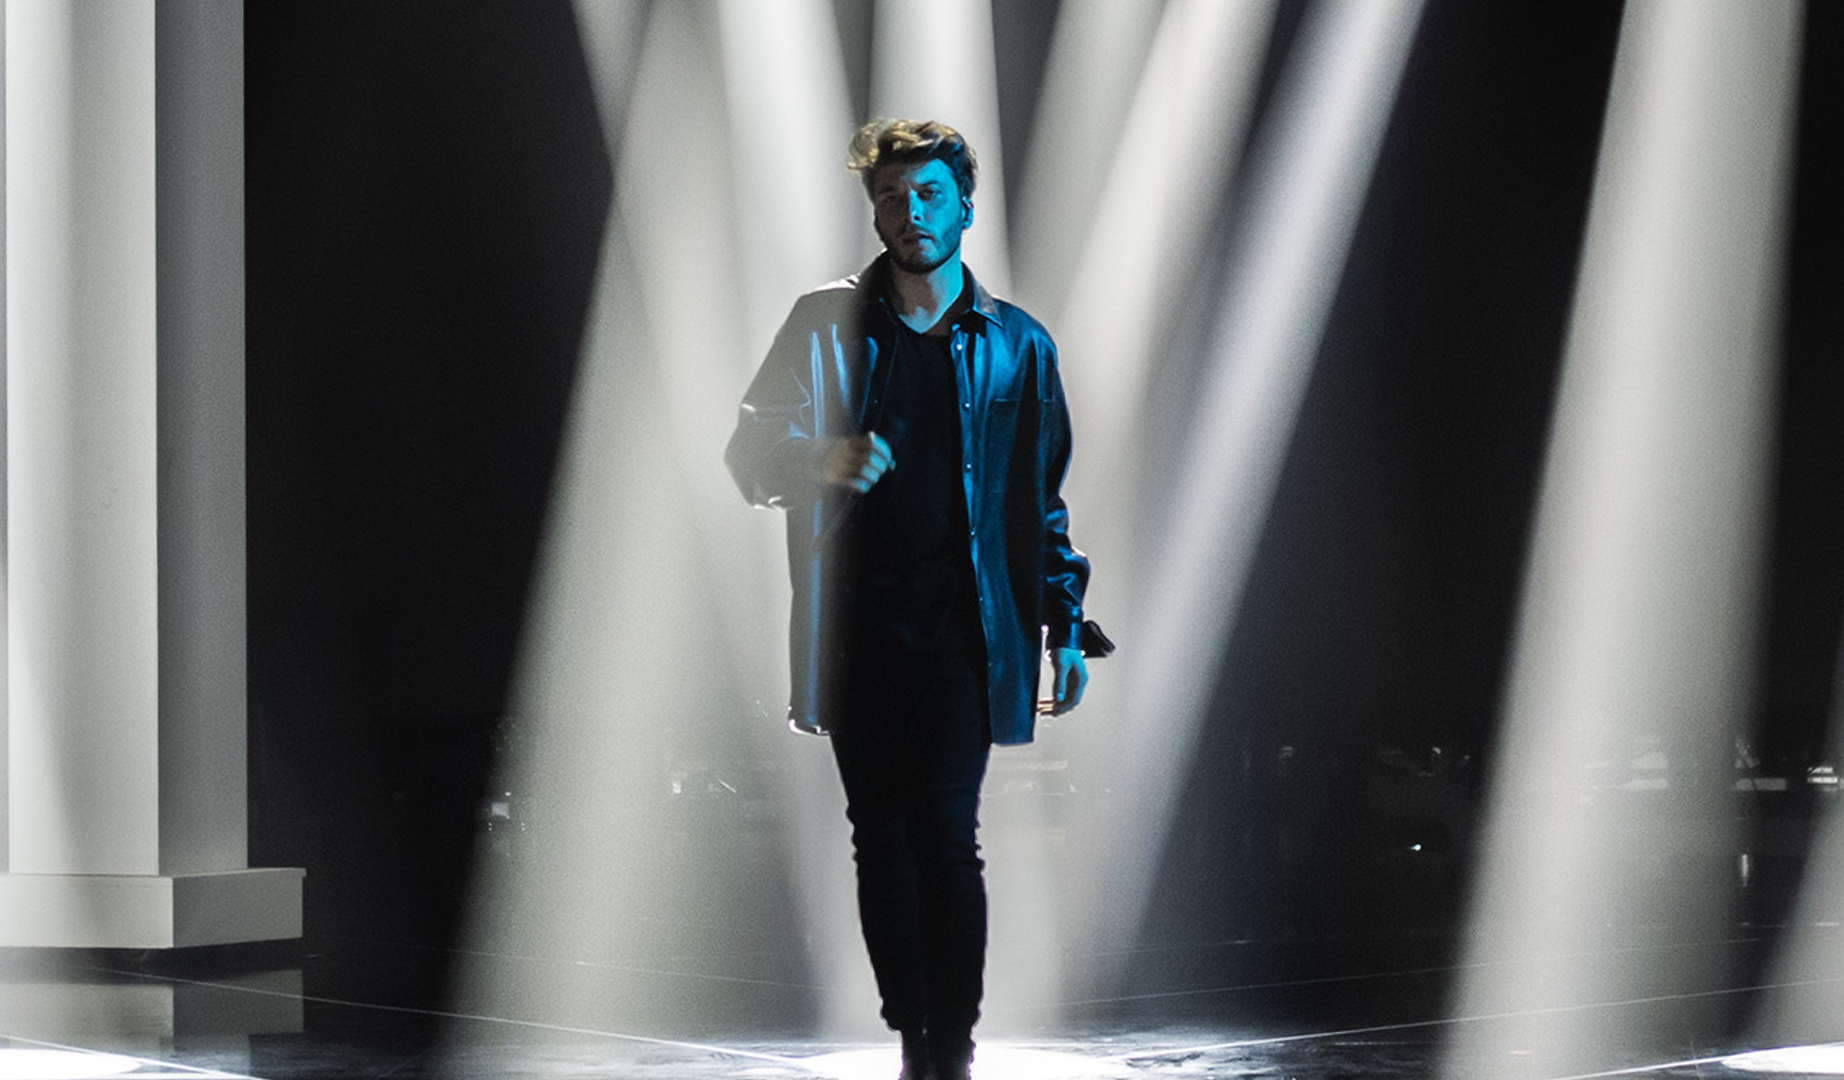 Tonight: Destino Eurovision 2021 selects Blas Canto’s entry for Rotterdam